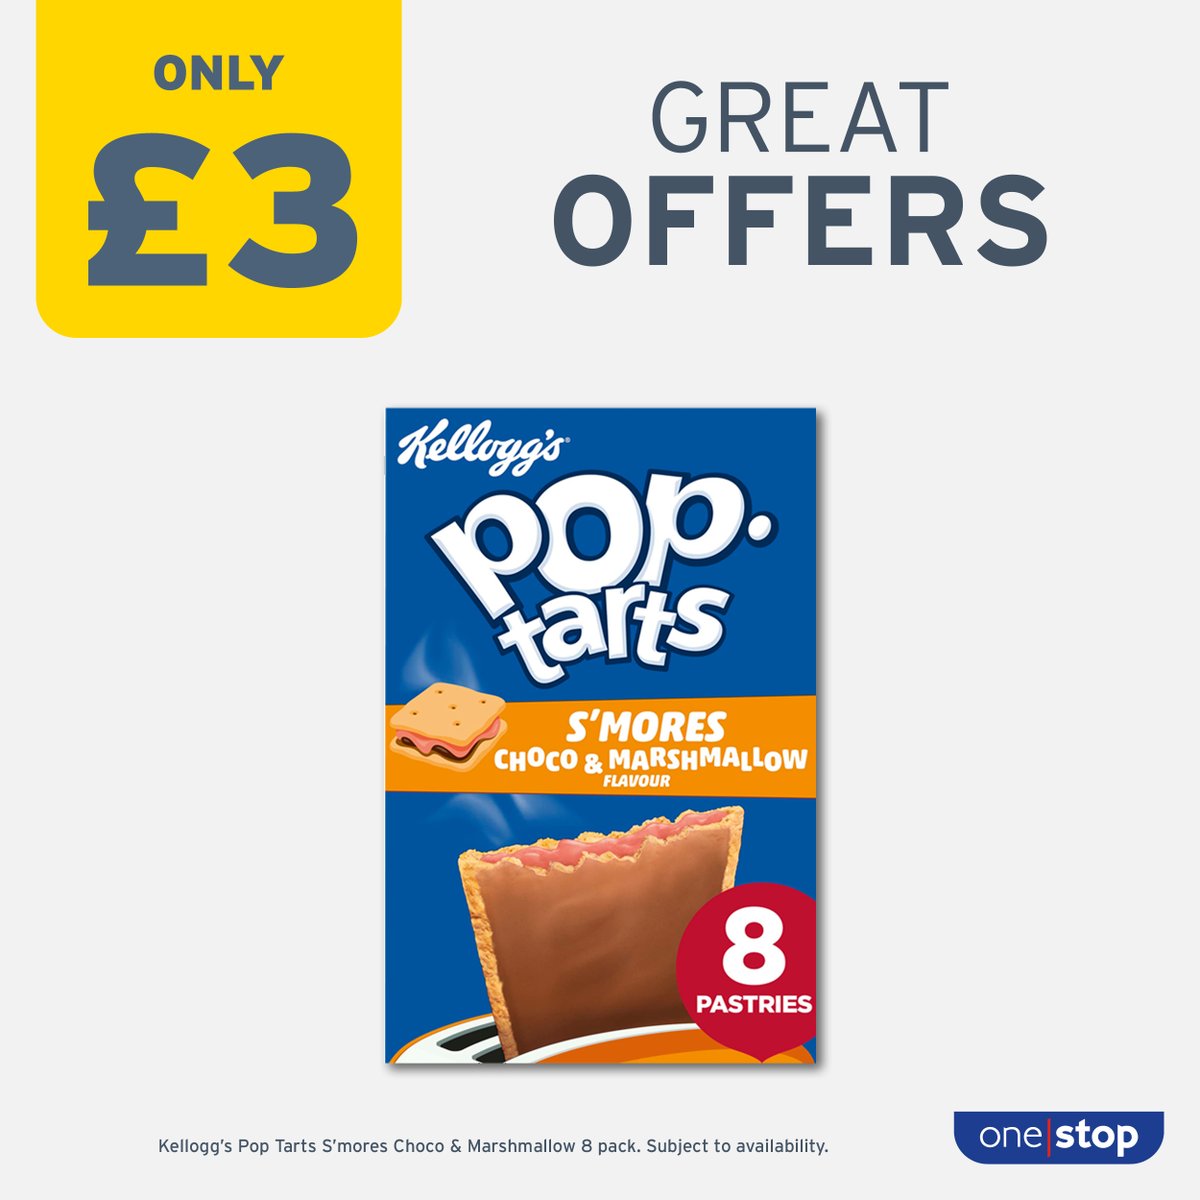 Satisfy your sweet craving with Kellogg's Pop Tarts, S'mores Choco & Marshmallow! 🍫 Find your local store 👉 onestop.co.uk/store-finder/ Subject to availability. Participating stores only.